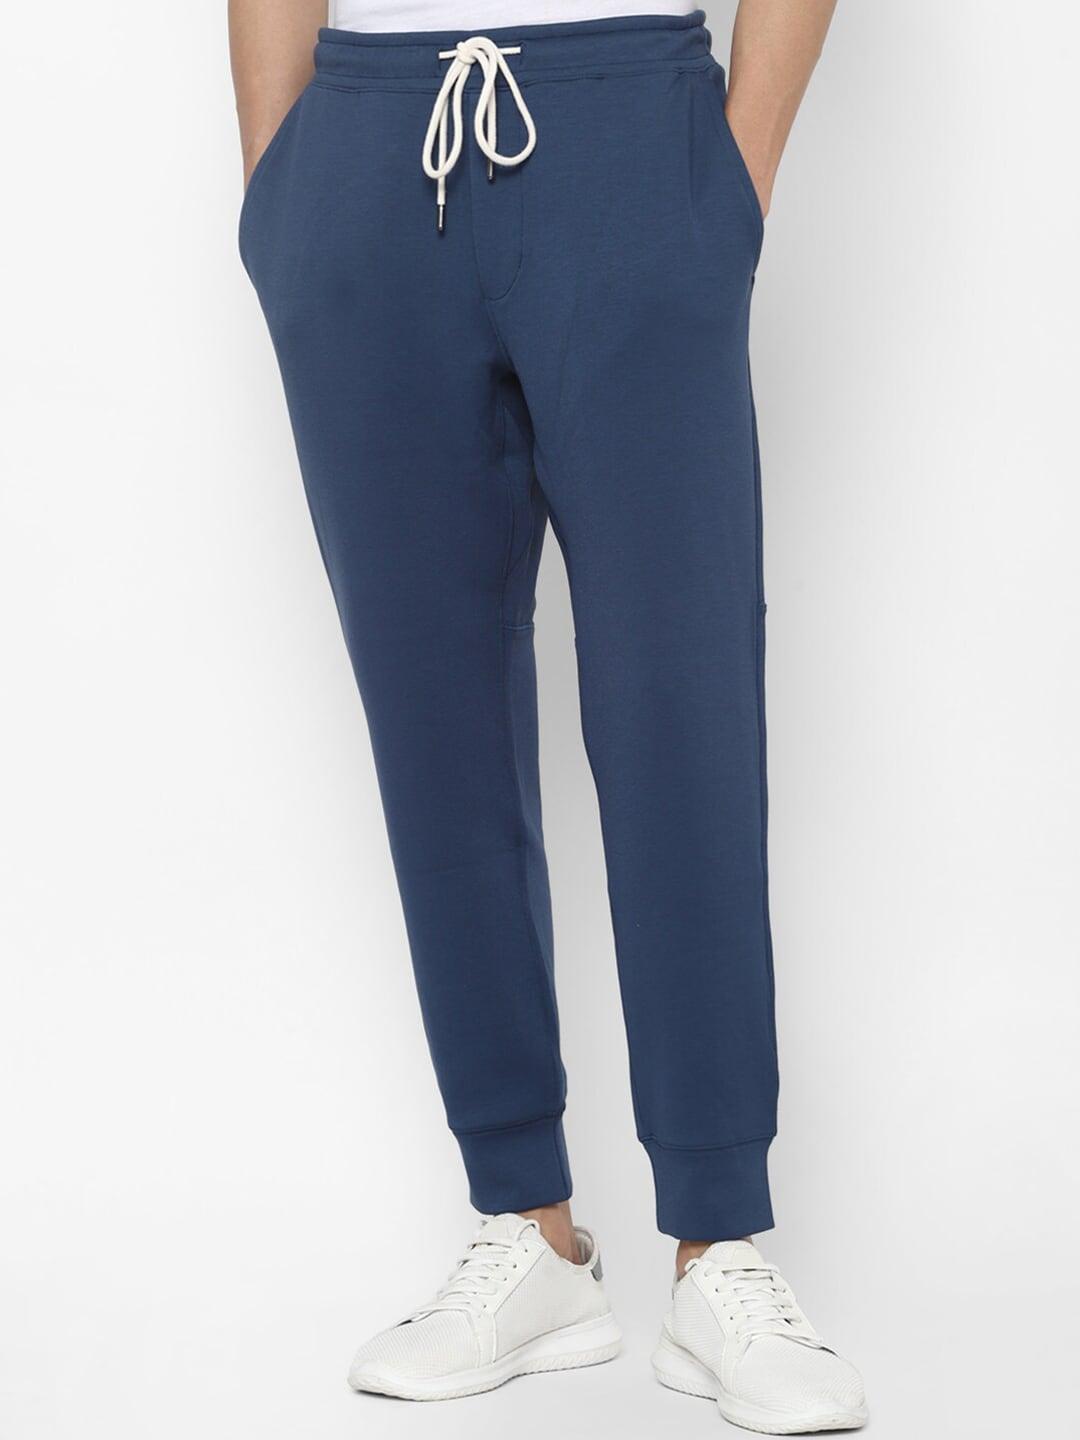 american-eagle-outfitters-men-blue-solid-joggers